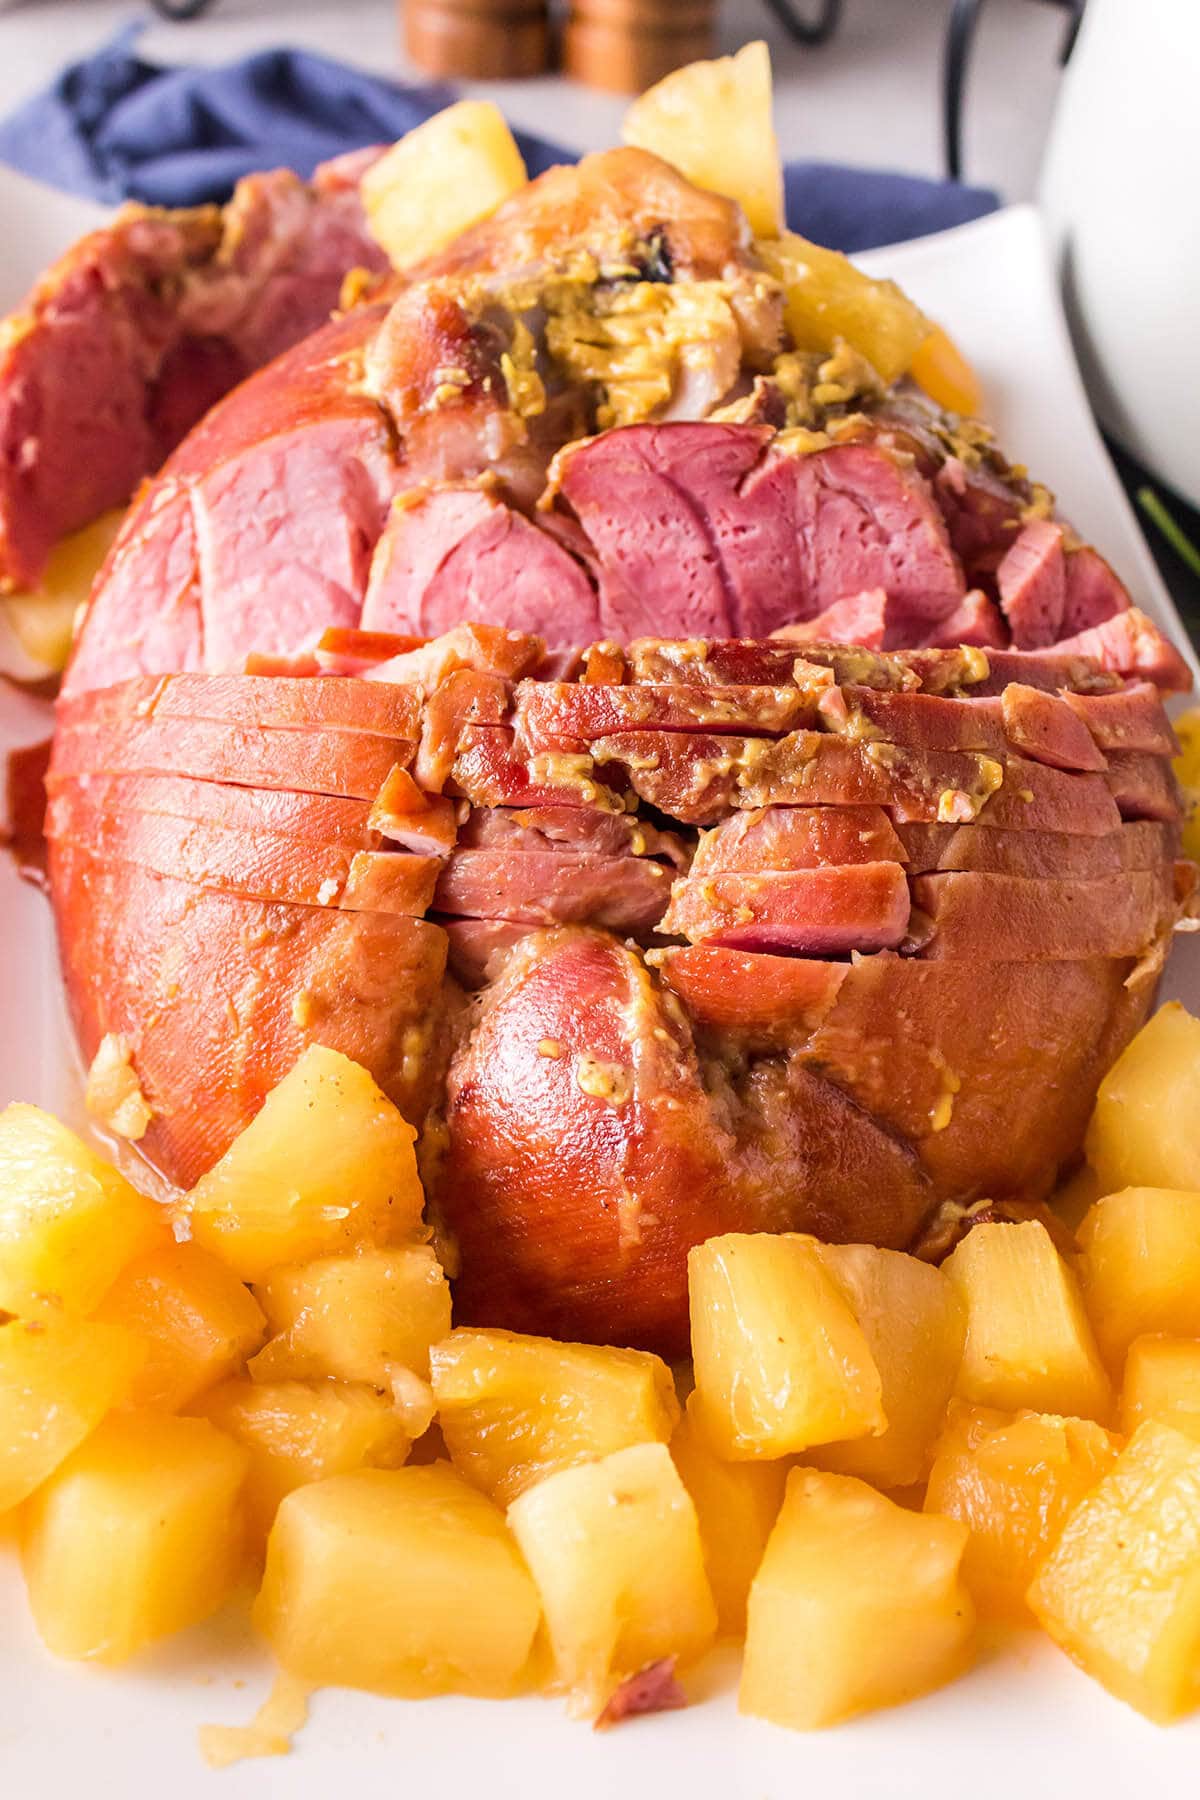 Cooked ham with pineapple on platter.